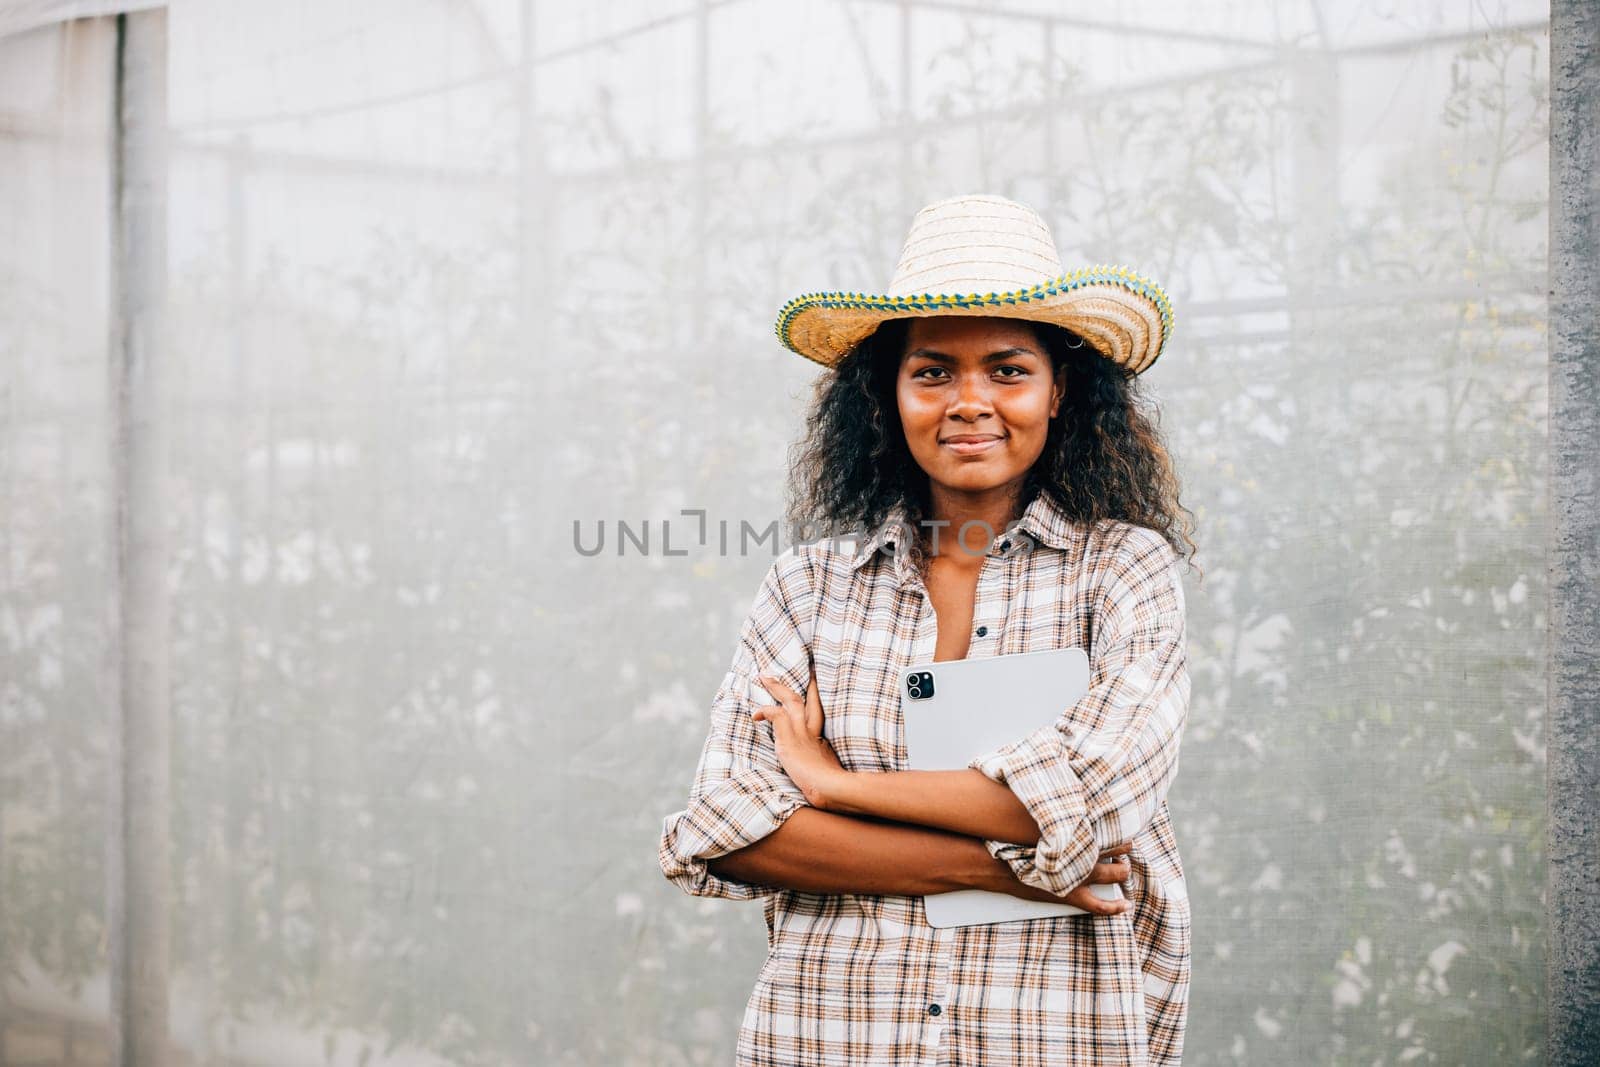 Portrait of a young and successful greenhouse owner wearing a checked shirt and apron standing with crossed arms. A black woman holding a tablet looks at the greenhouse with a smile.